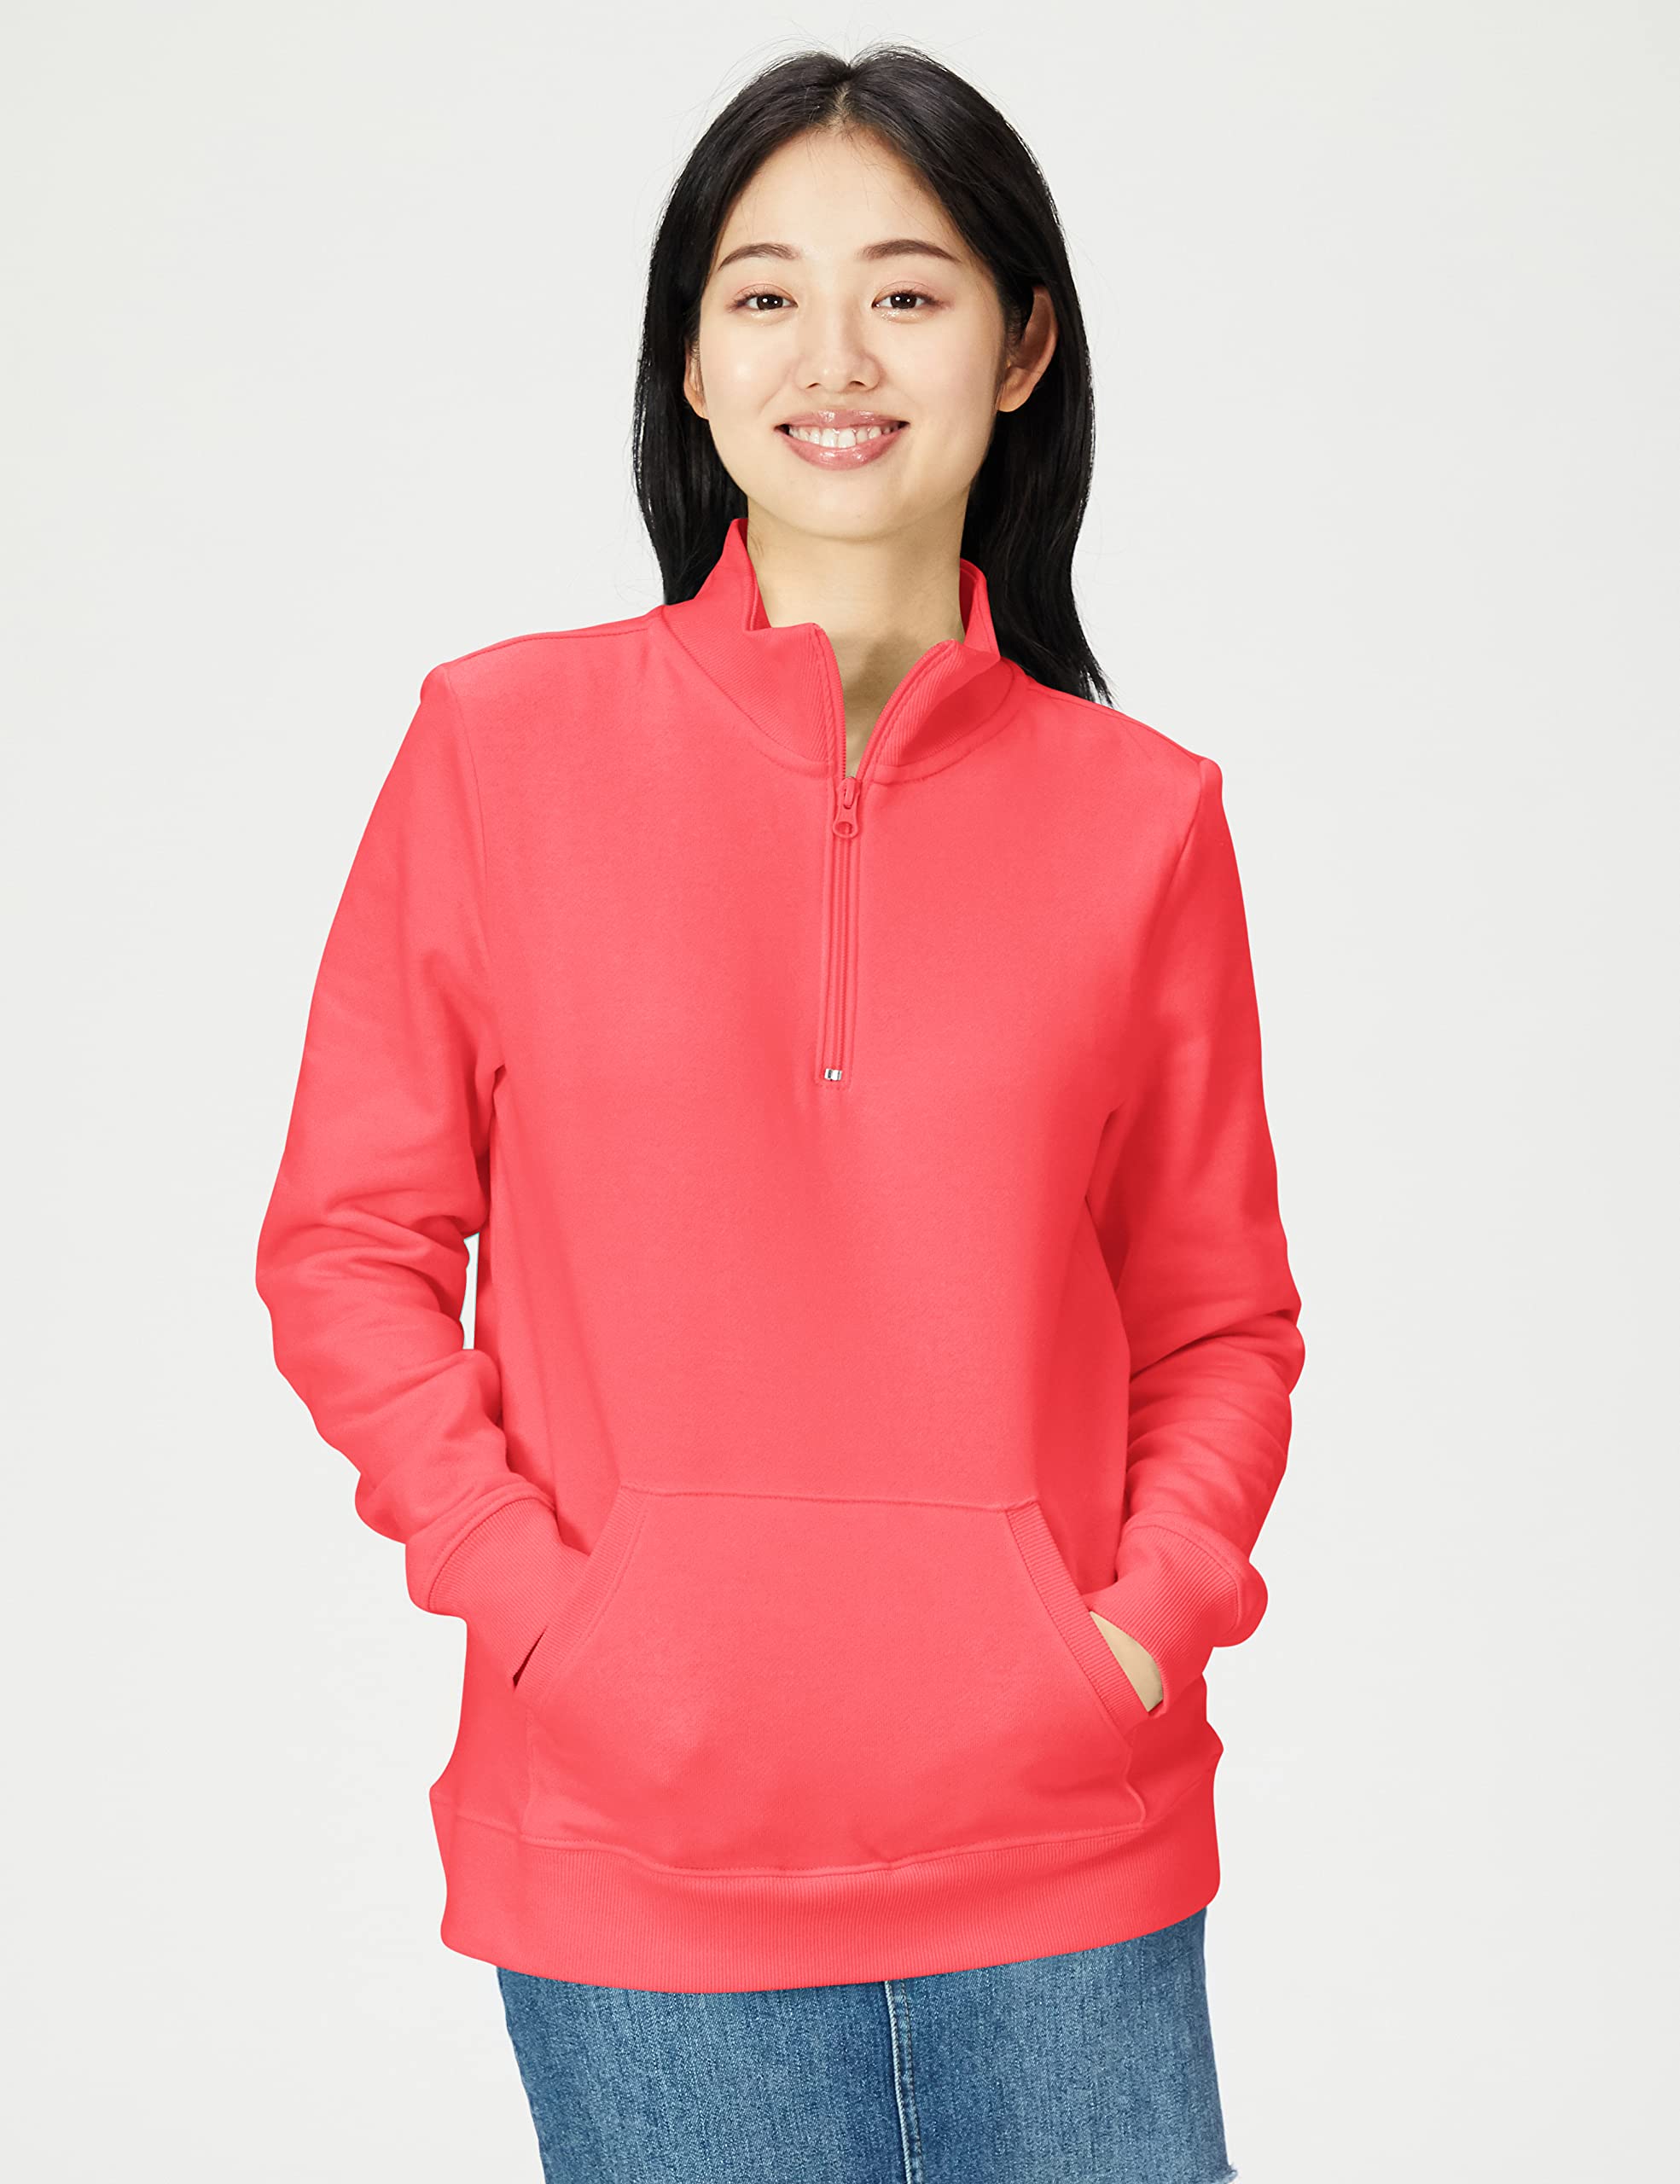 Amazon Essentials Women's Long-Sleeve Lightweight French Terry Fleece Quarter-Zip Top (Available in Plus Size)